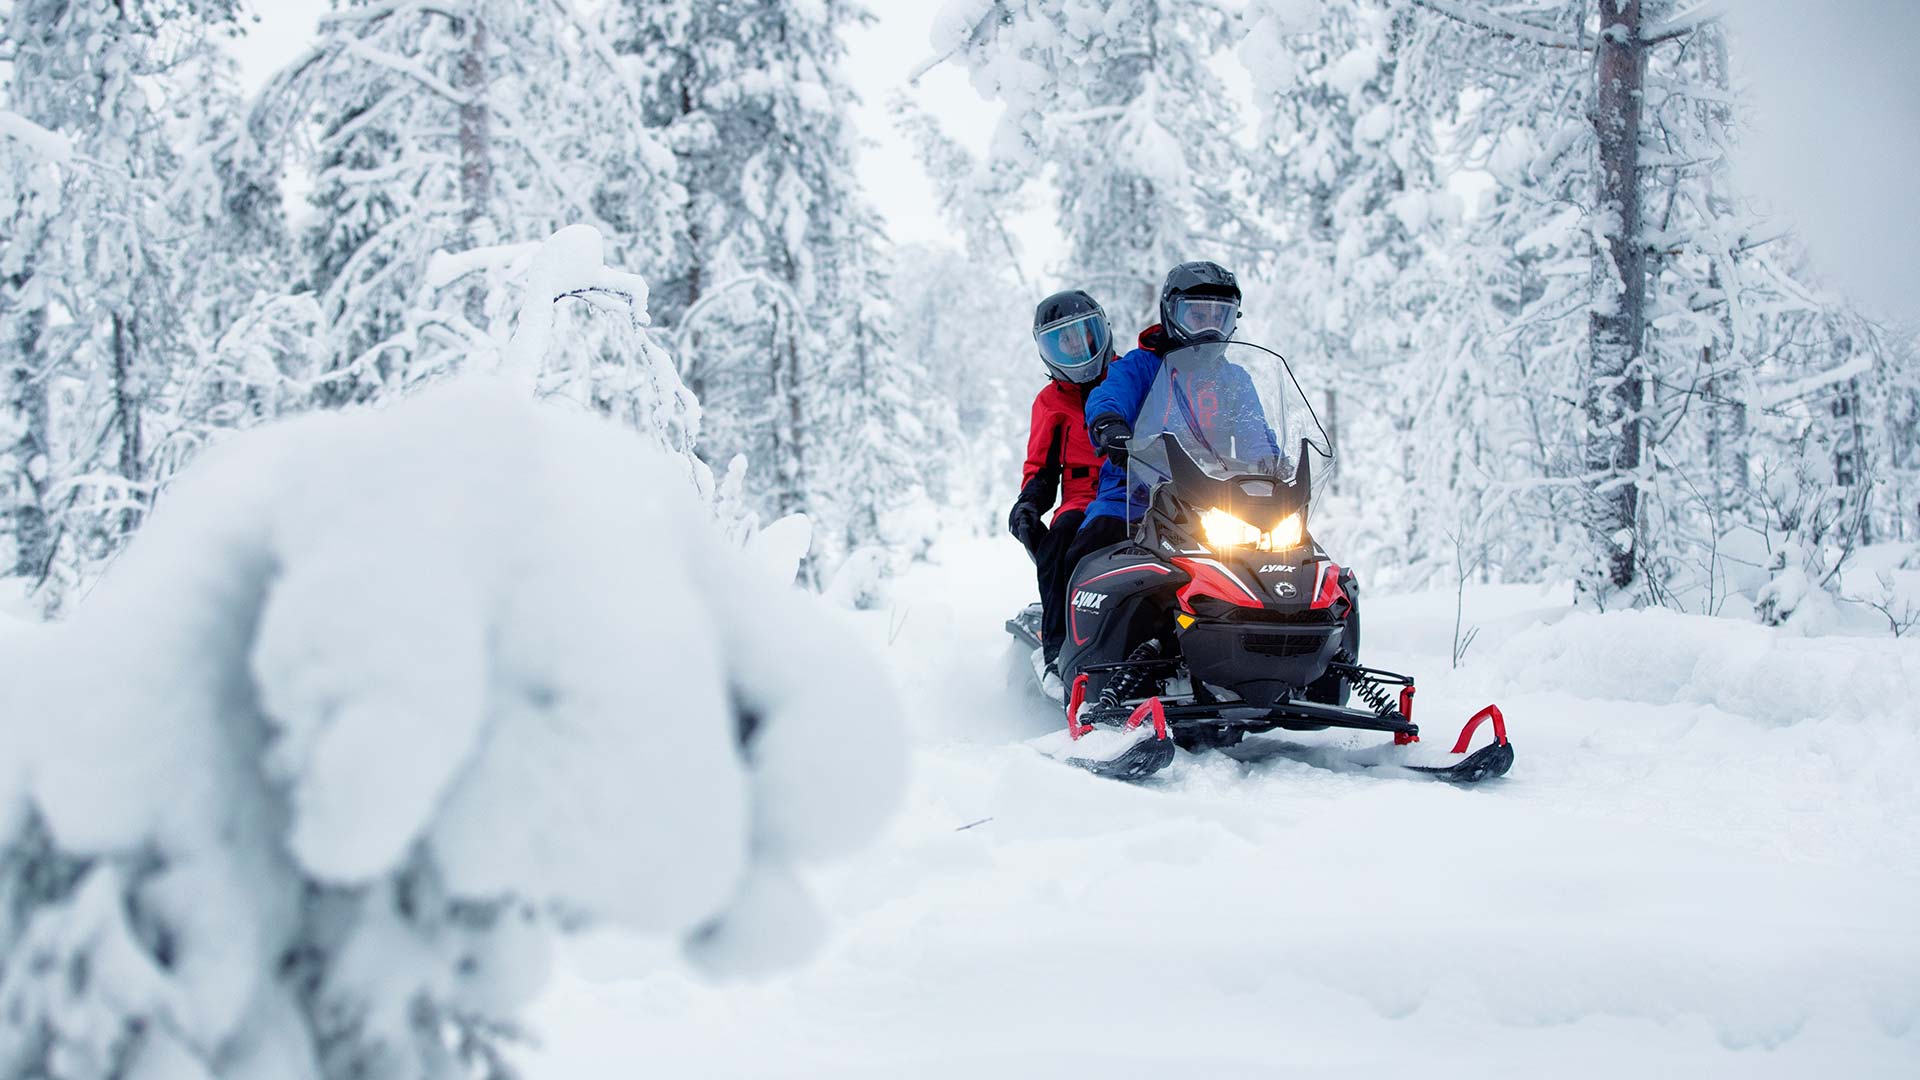 Lynx Adventure LX touring riding on trail in snowy forest